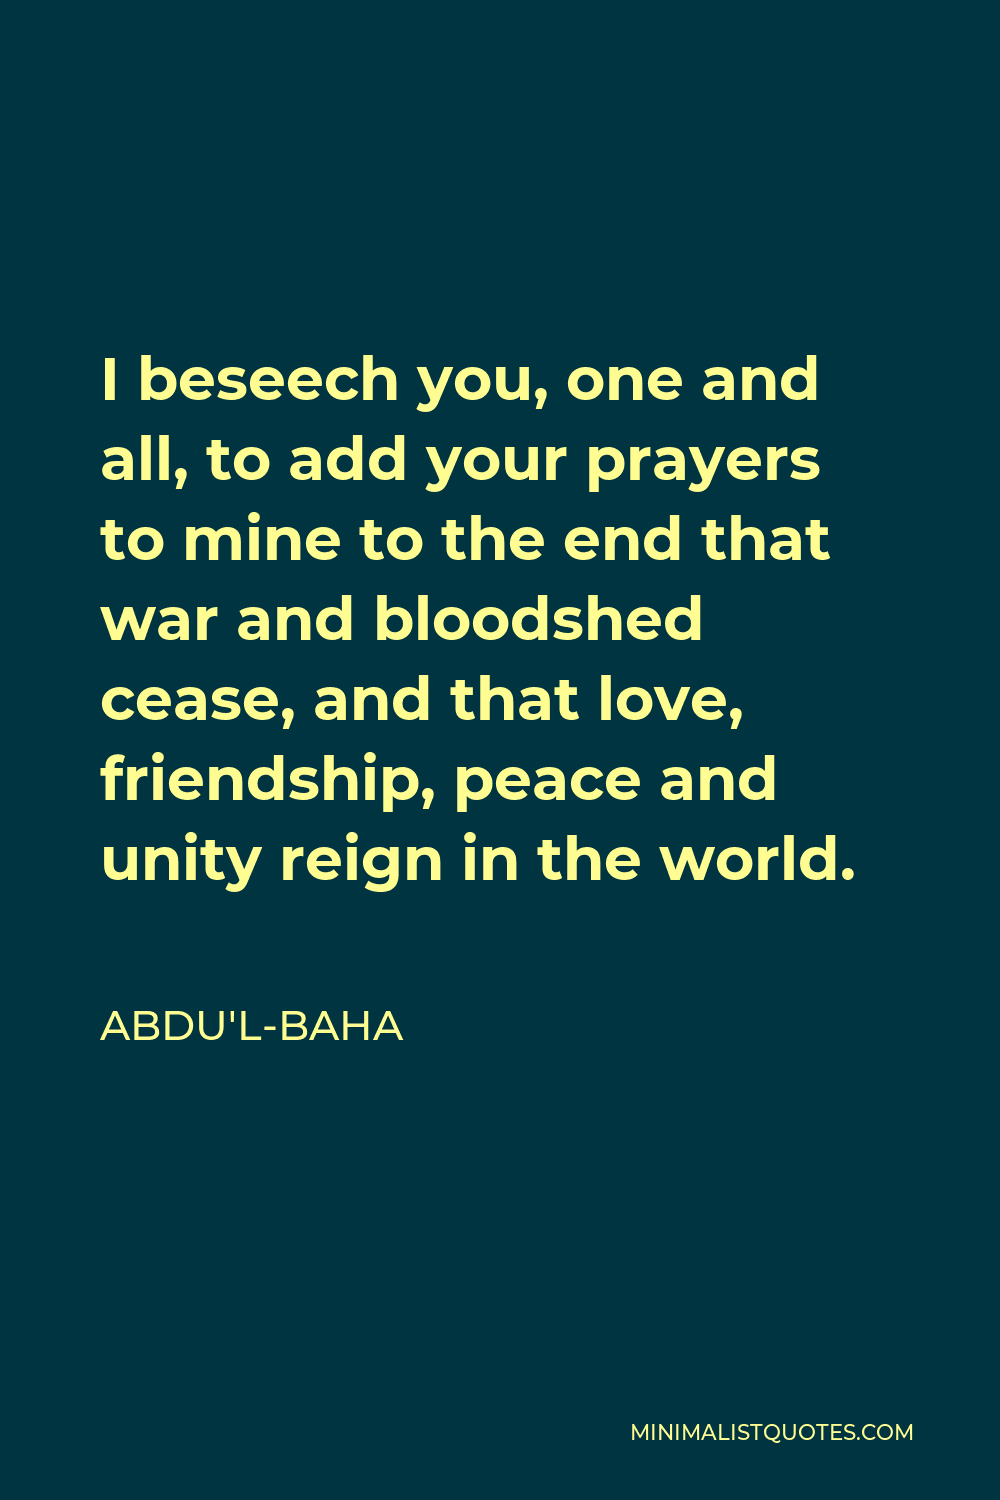 Abdu'l-Baha Quote - I beseech you, one and all, to add your prayers to mine to the end that war and bloodshed cease, and that love, friendship, peace and unity reign in the world.